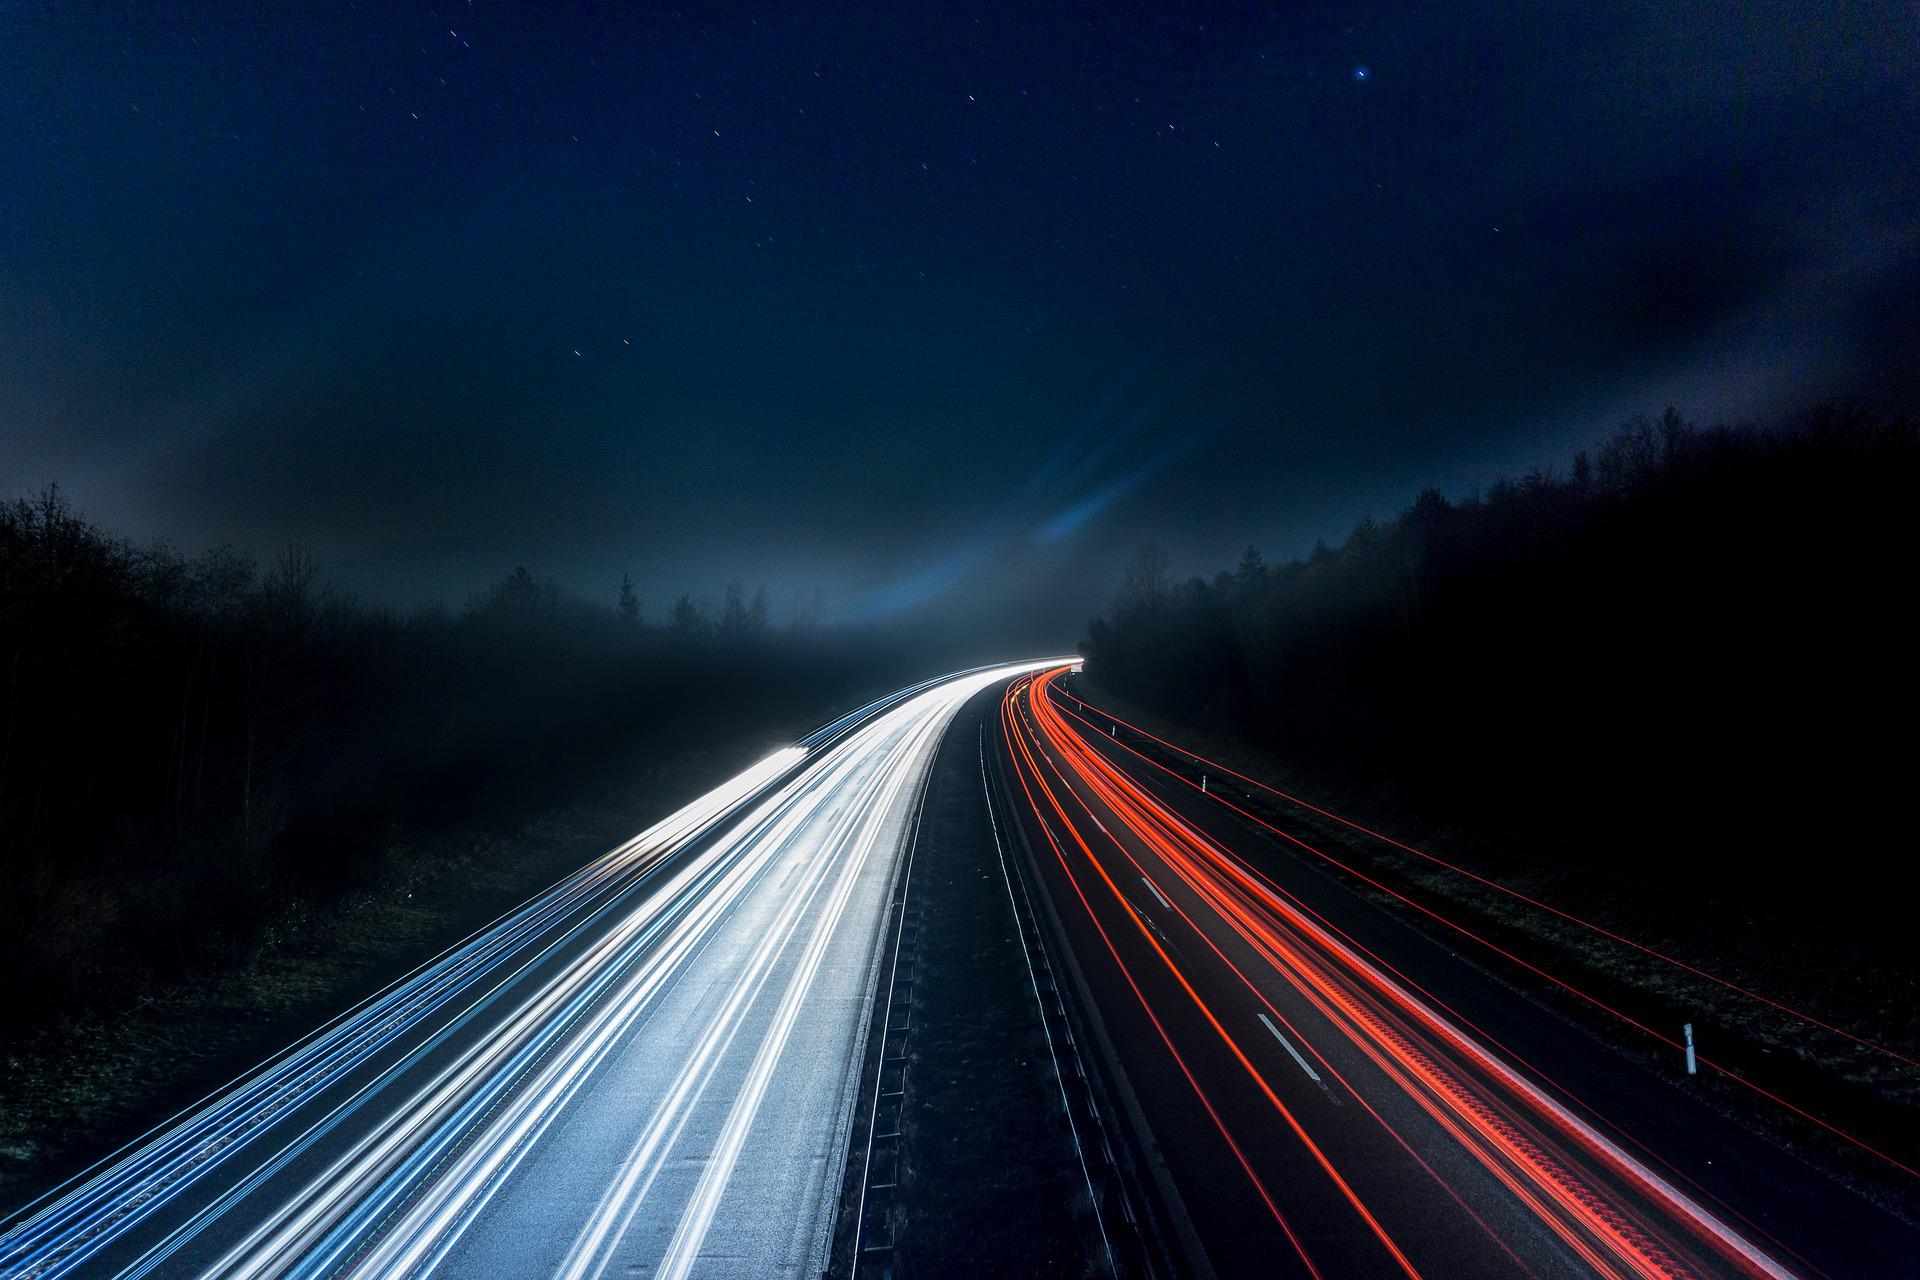 Long exposure shot of a highway at night, capturing streaks of white and red lights from speeding vehicles, surrounded by dark forest under a starry sky.